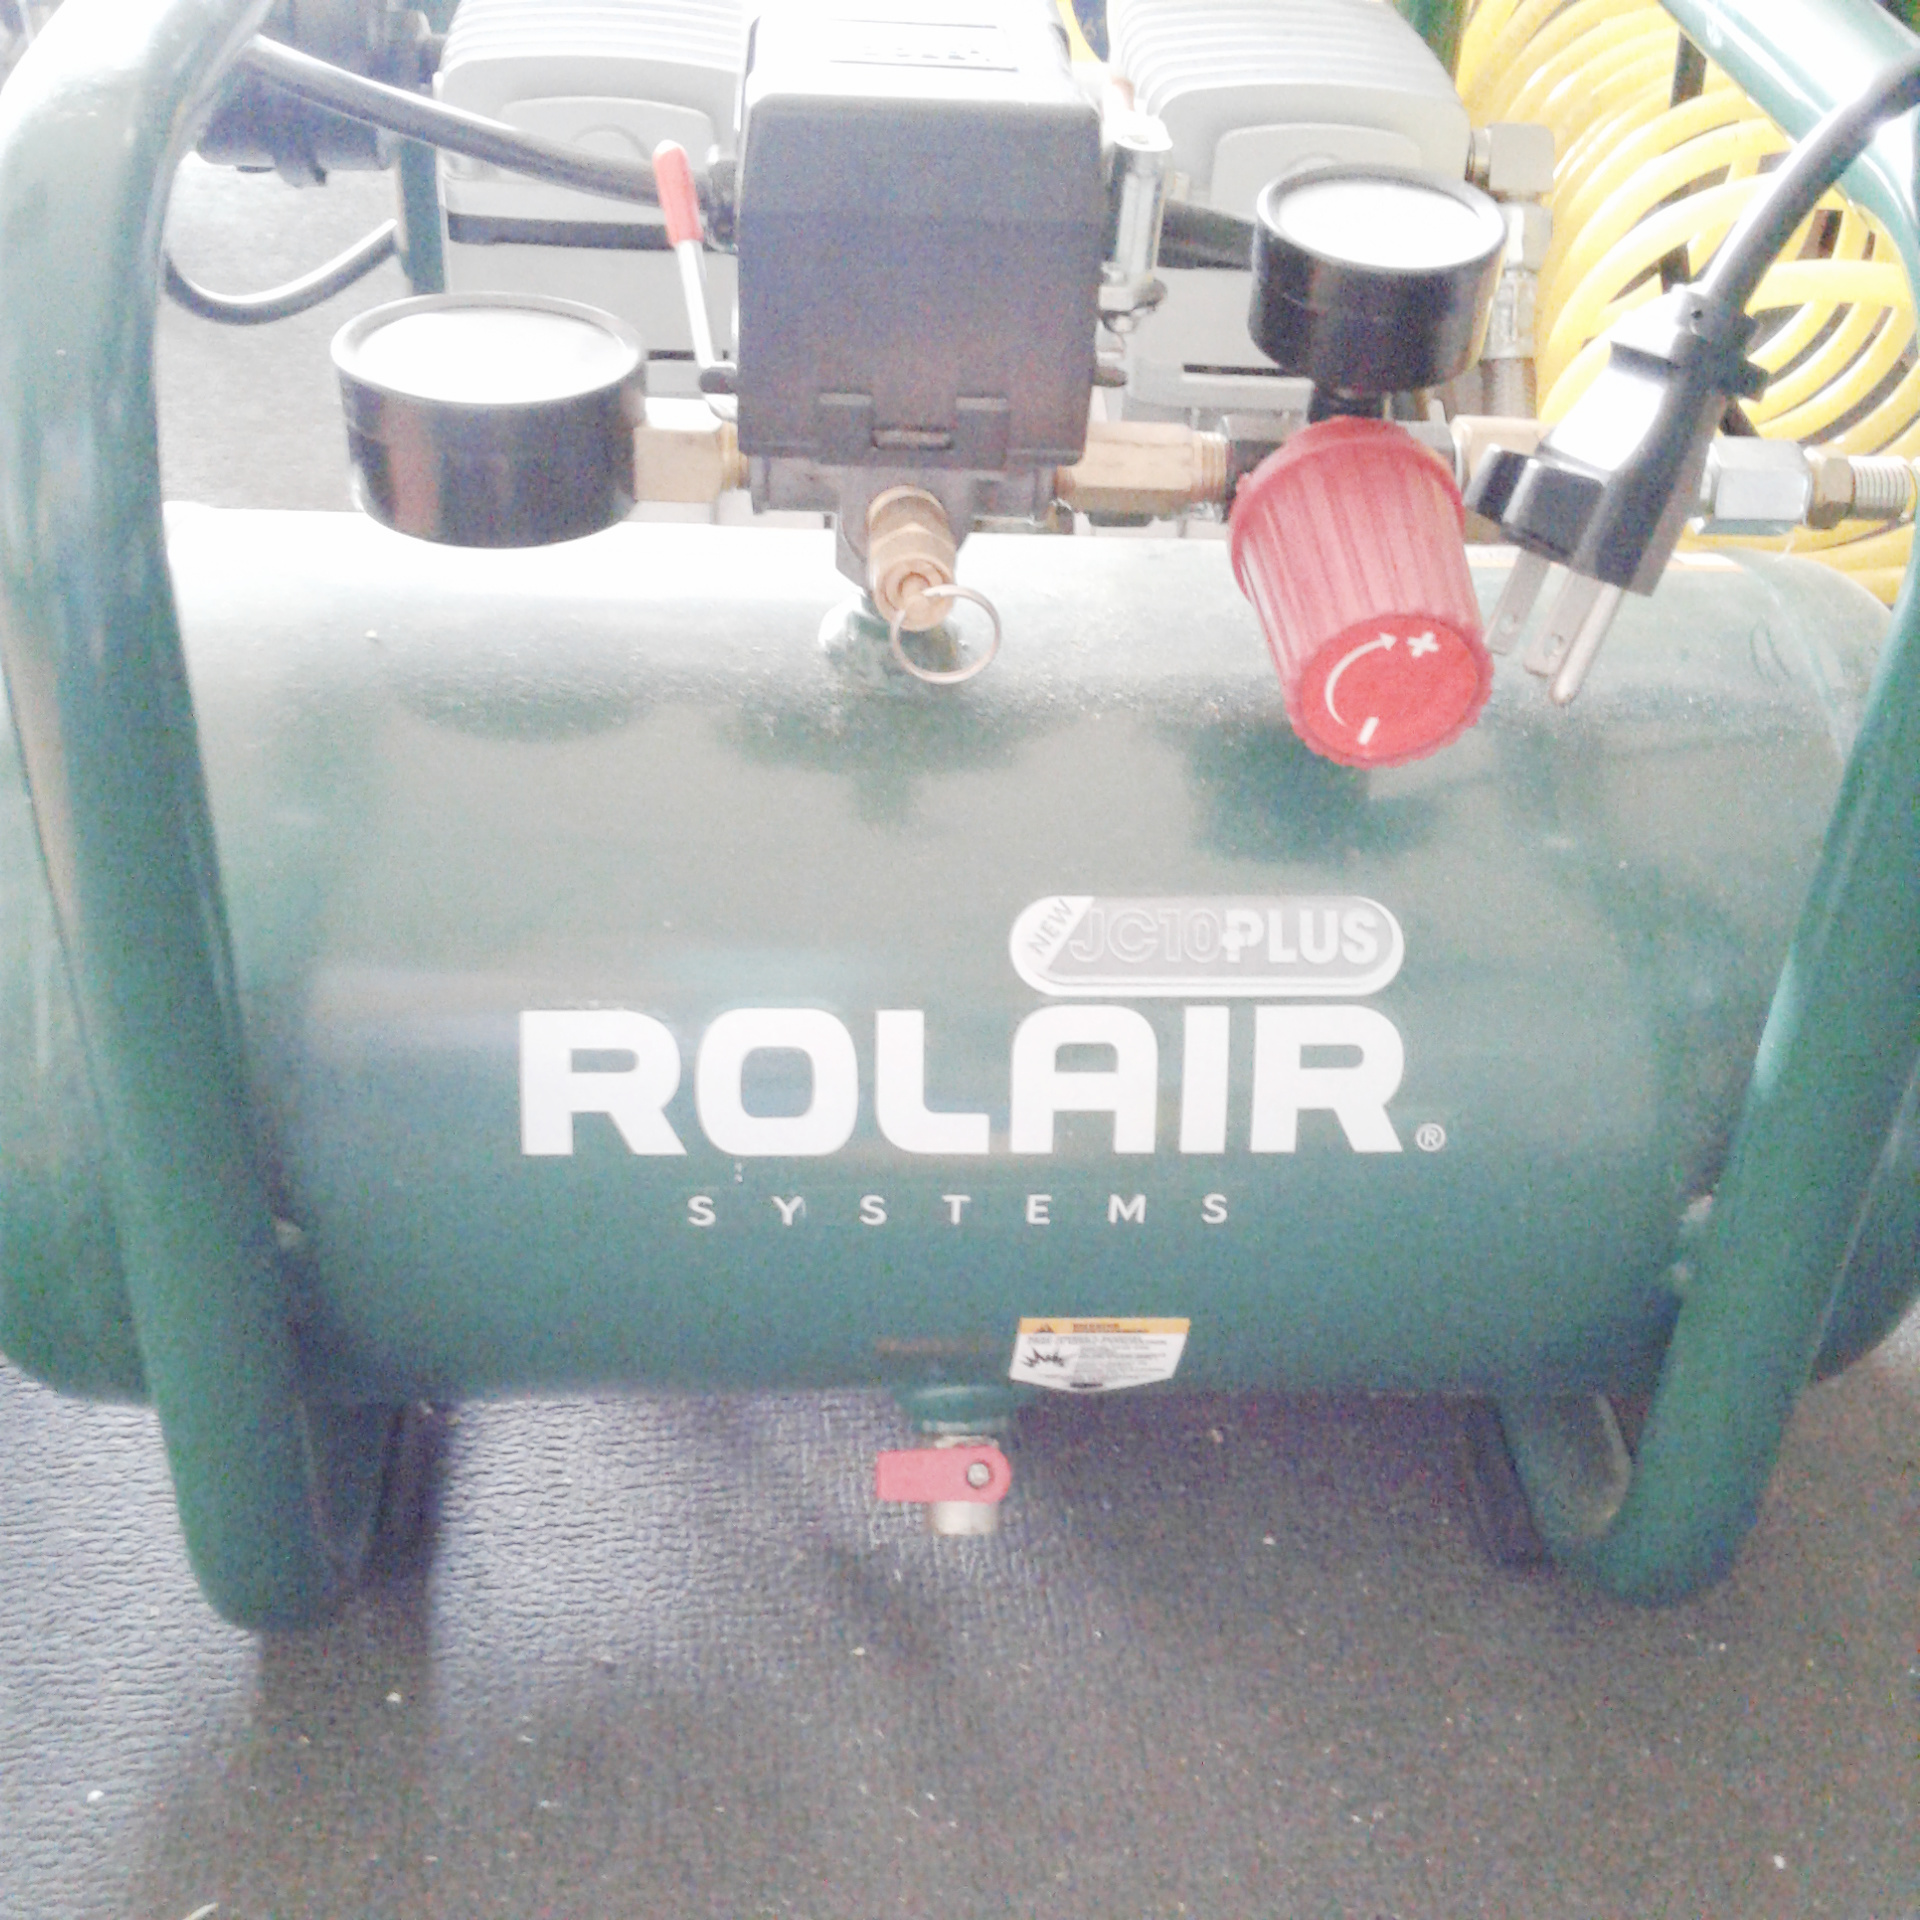 Equipment Lot: Cassese CS2 Underpinner, RolairJC10 Air Compressor & Moulding (used) Item # UE-122021A (Florida)